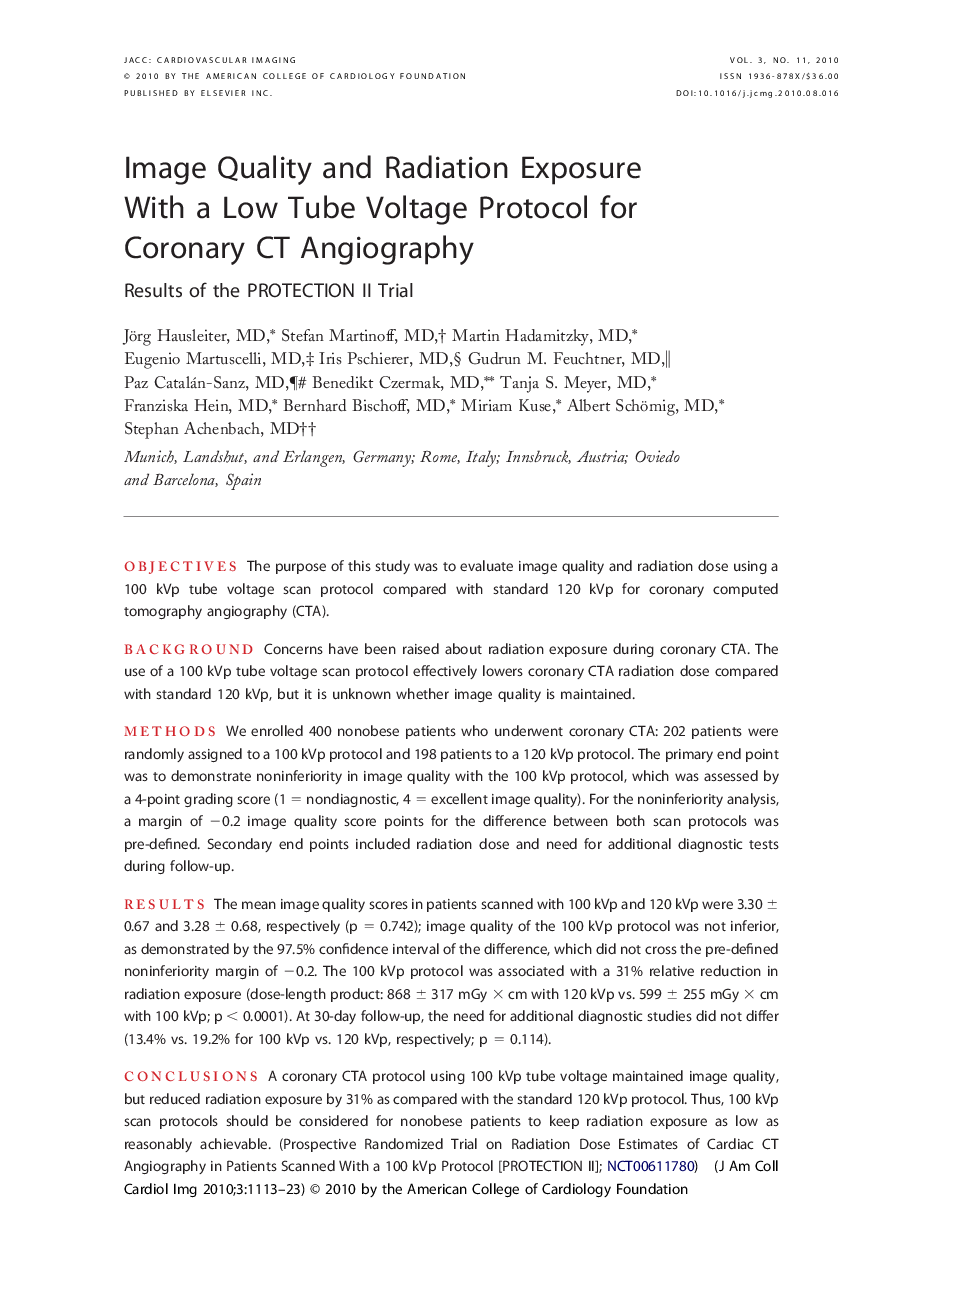 Image Quality and Radiation Exposure With a Low Tube Voltage Protocol for Coronary CT Angiography : Results of the PROTECTION II Trial